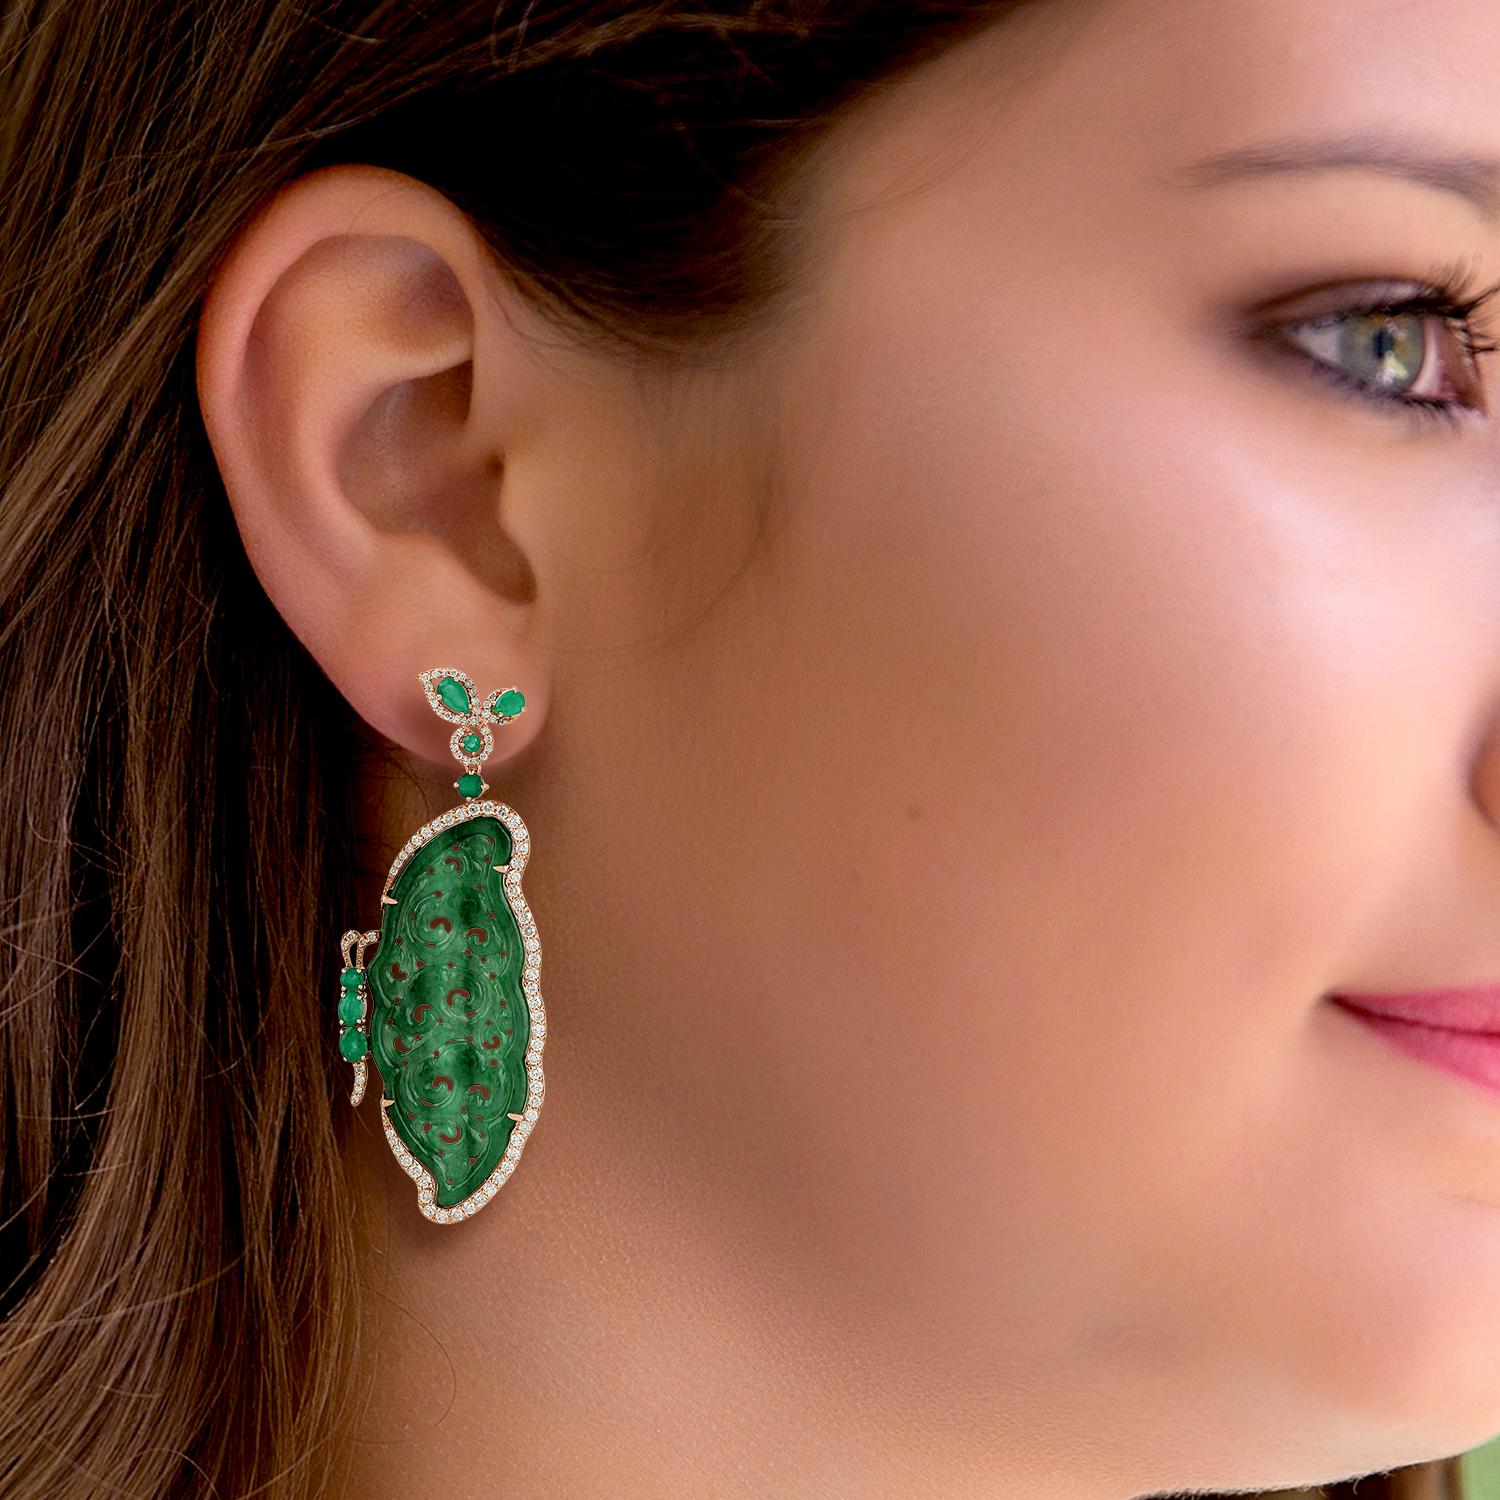 These stunning hand carved Jade earrings are crafted in 18-karat white gold. It is set in 28.58 carats Jade. 1.82 carats emerald and 1.85 carats of sparkling diamonds.

FOLLOW  MEGHNA JEWELS storefront to view the latest collection & exclusive